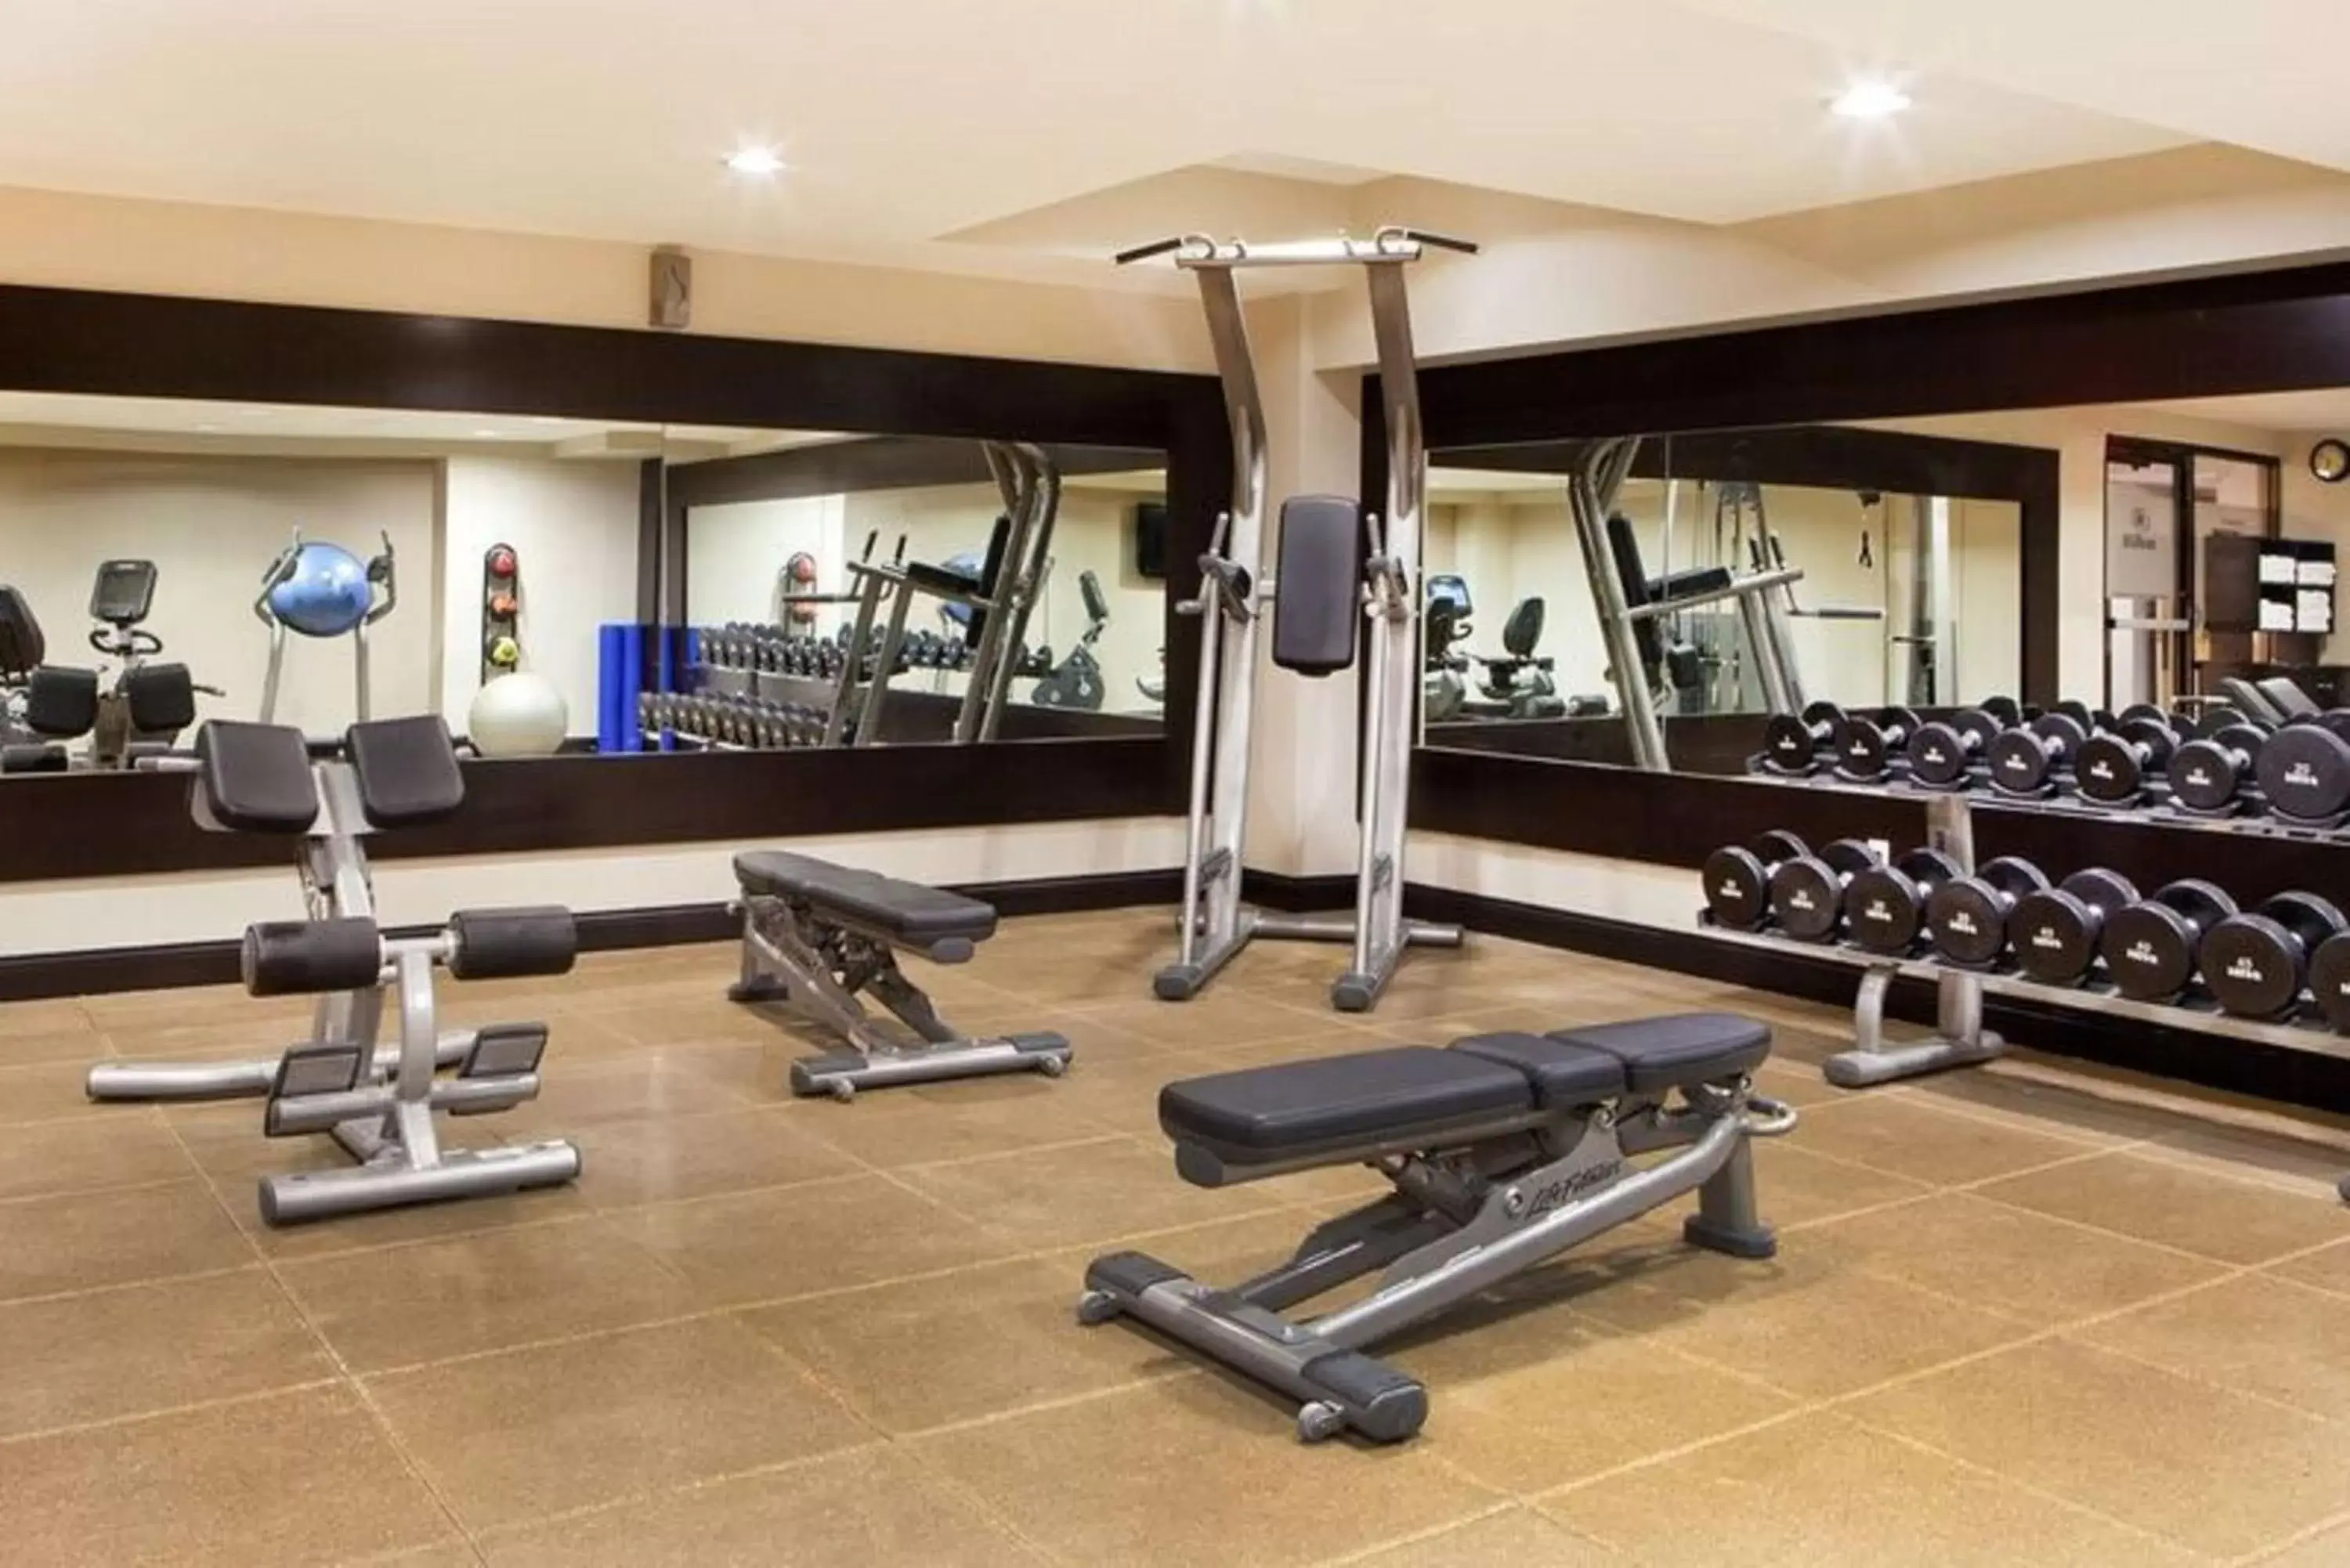 Fitness centre/facilities, Fitness Center/Facilities in Hilton Woodcliff Lake